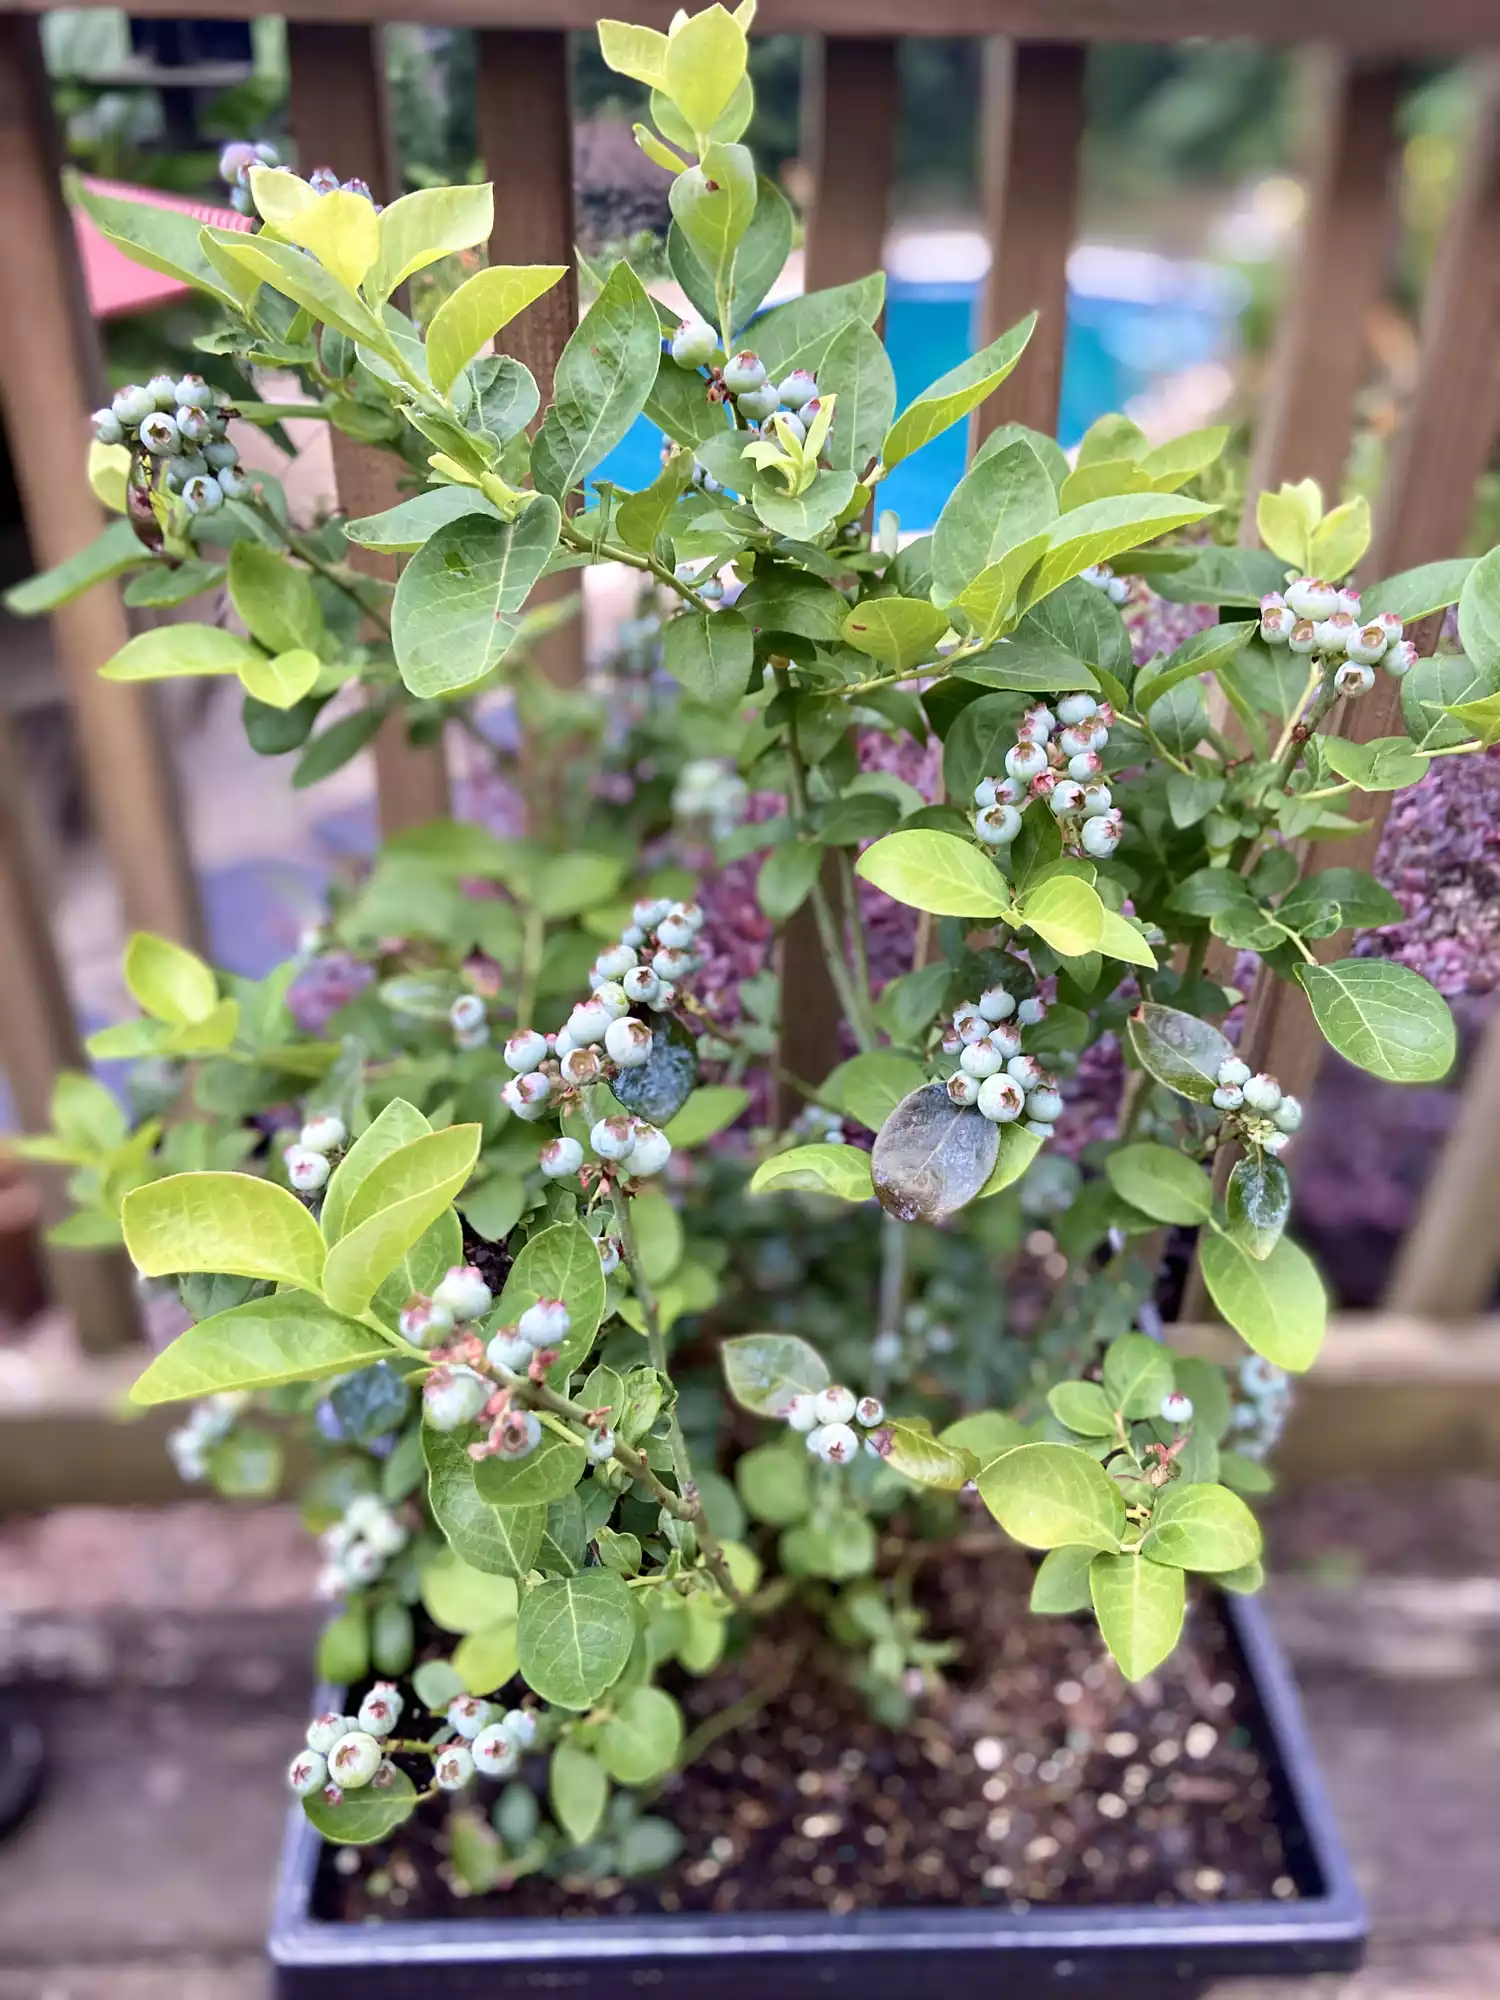 A potted blueberry plant in a container on an outdoor deck